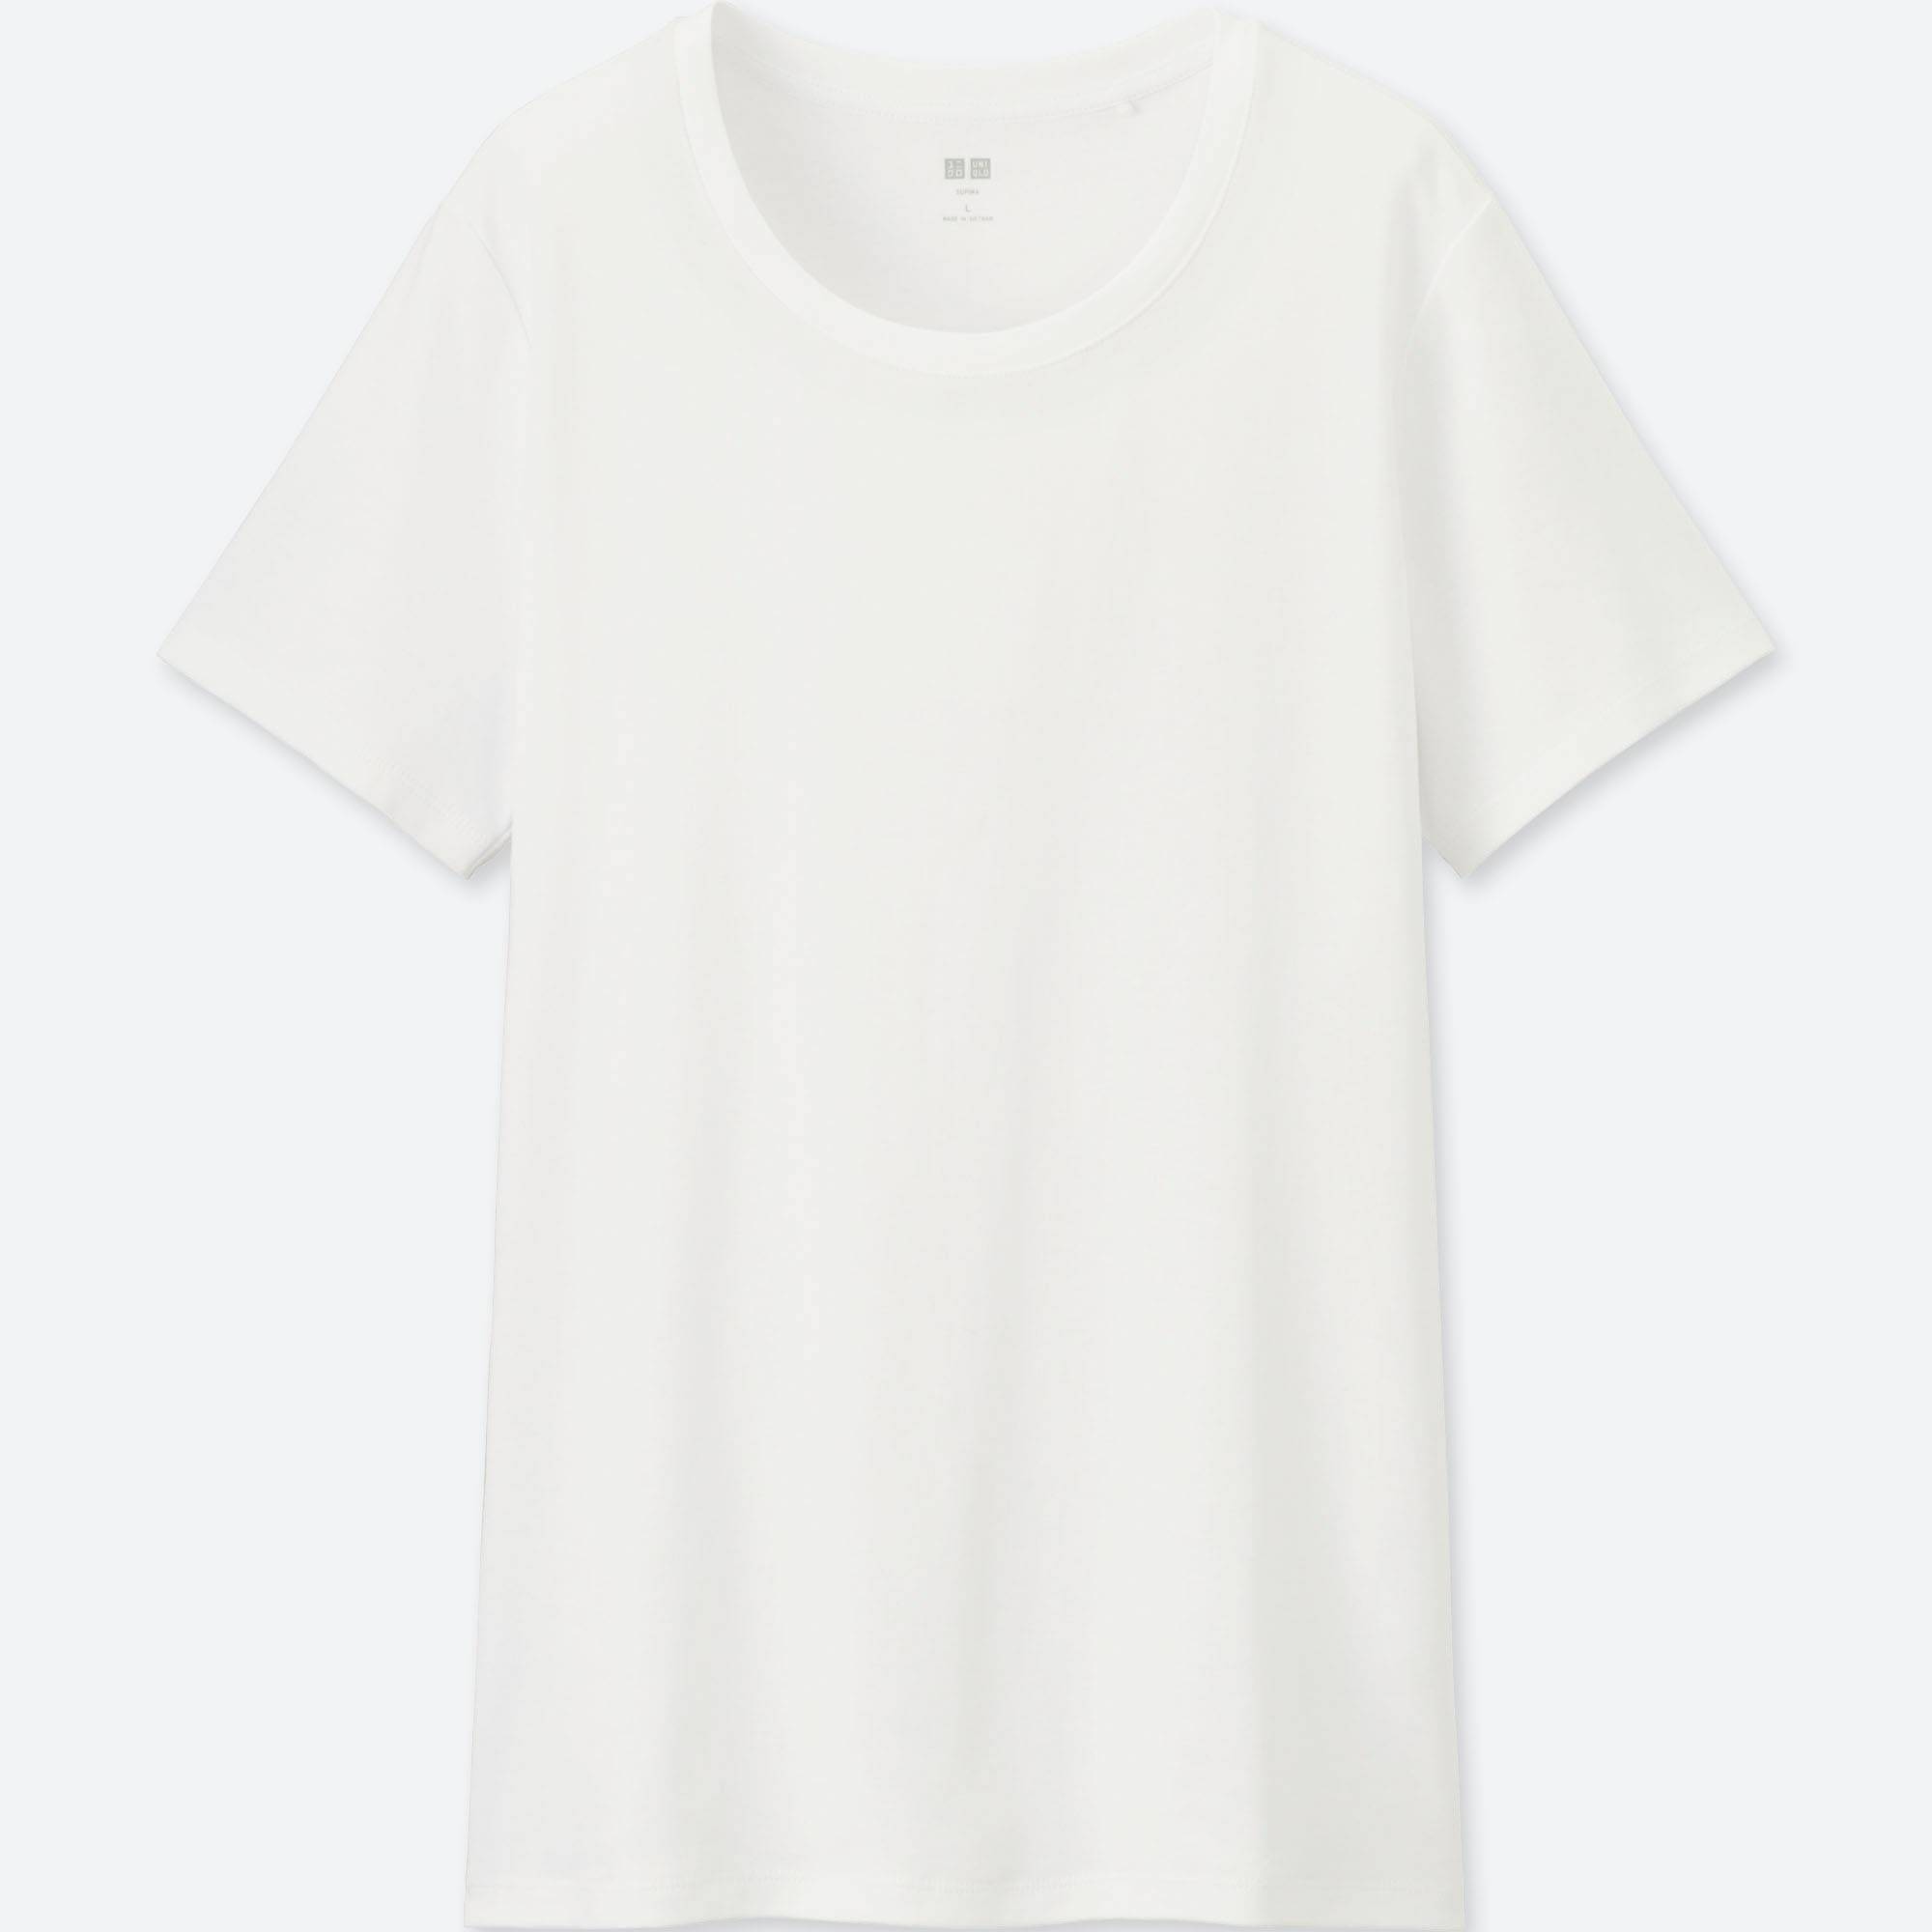 The Best Basic T-Shirts - Hither & Thither